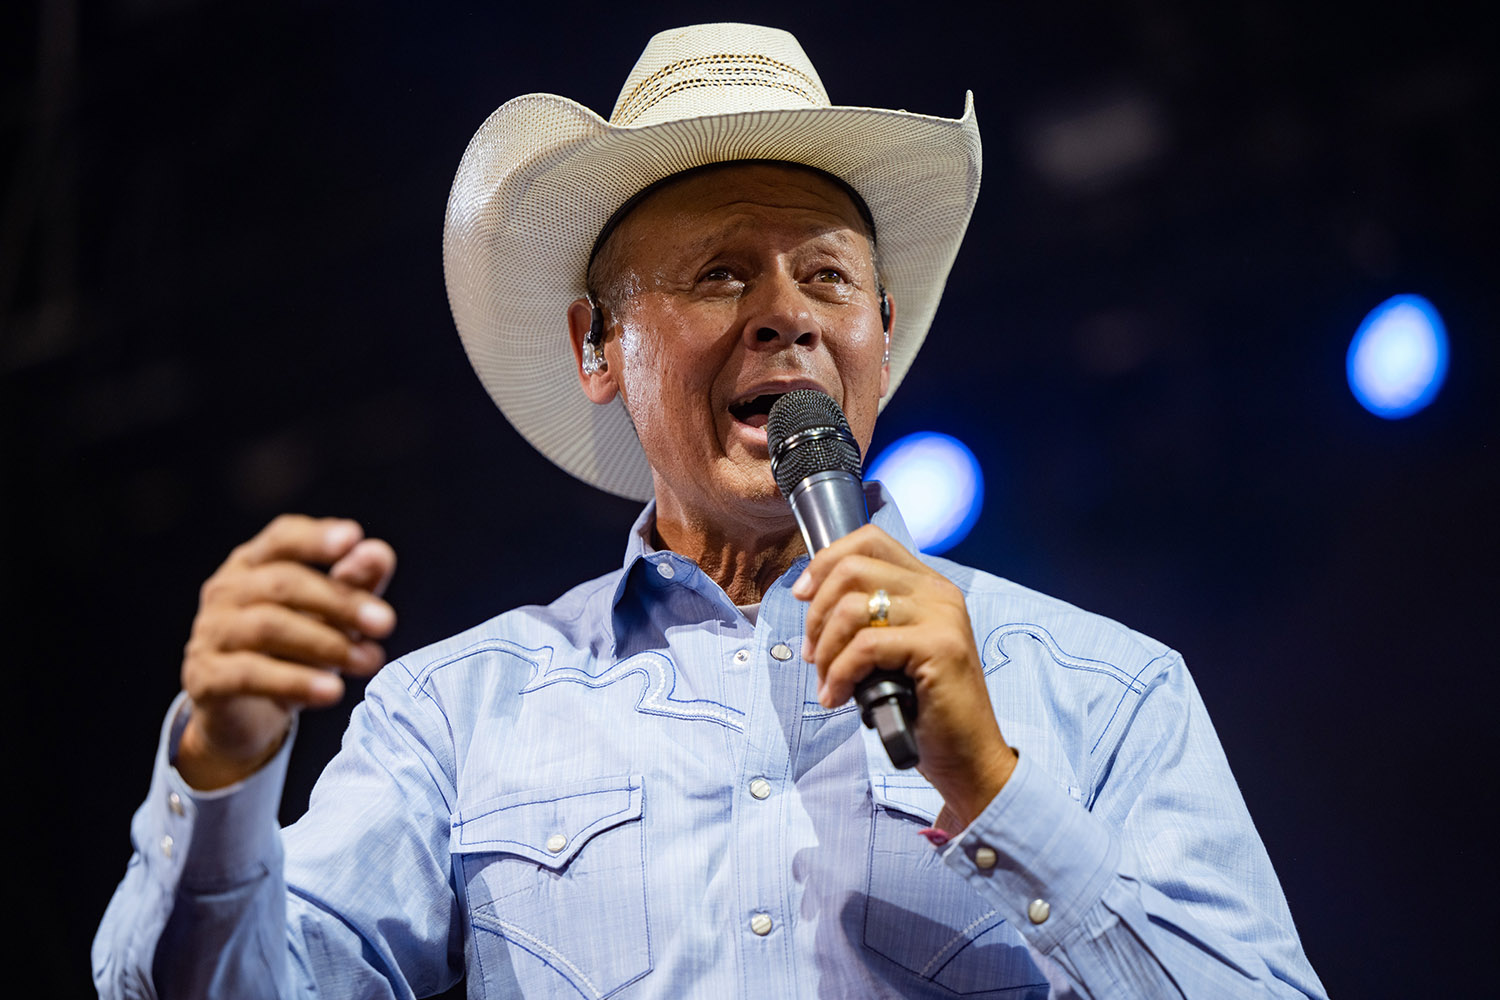 Neal McCoy, whom Blake Shelton wants to replace him on The Voice, sings into a microphone while wearing a blue button-down and a cowboy hat at Stagecoach 2022